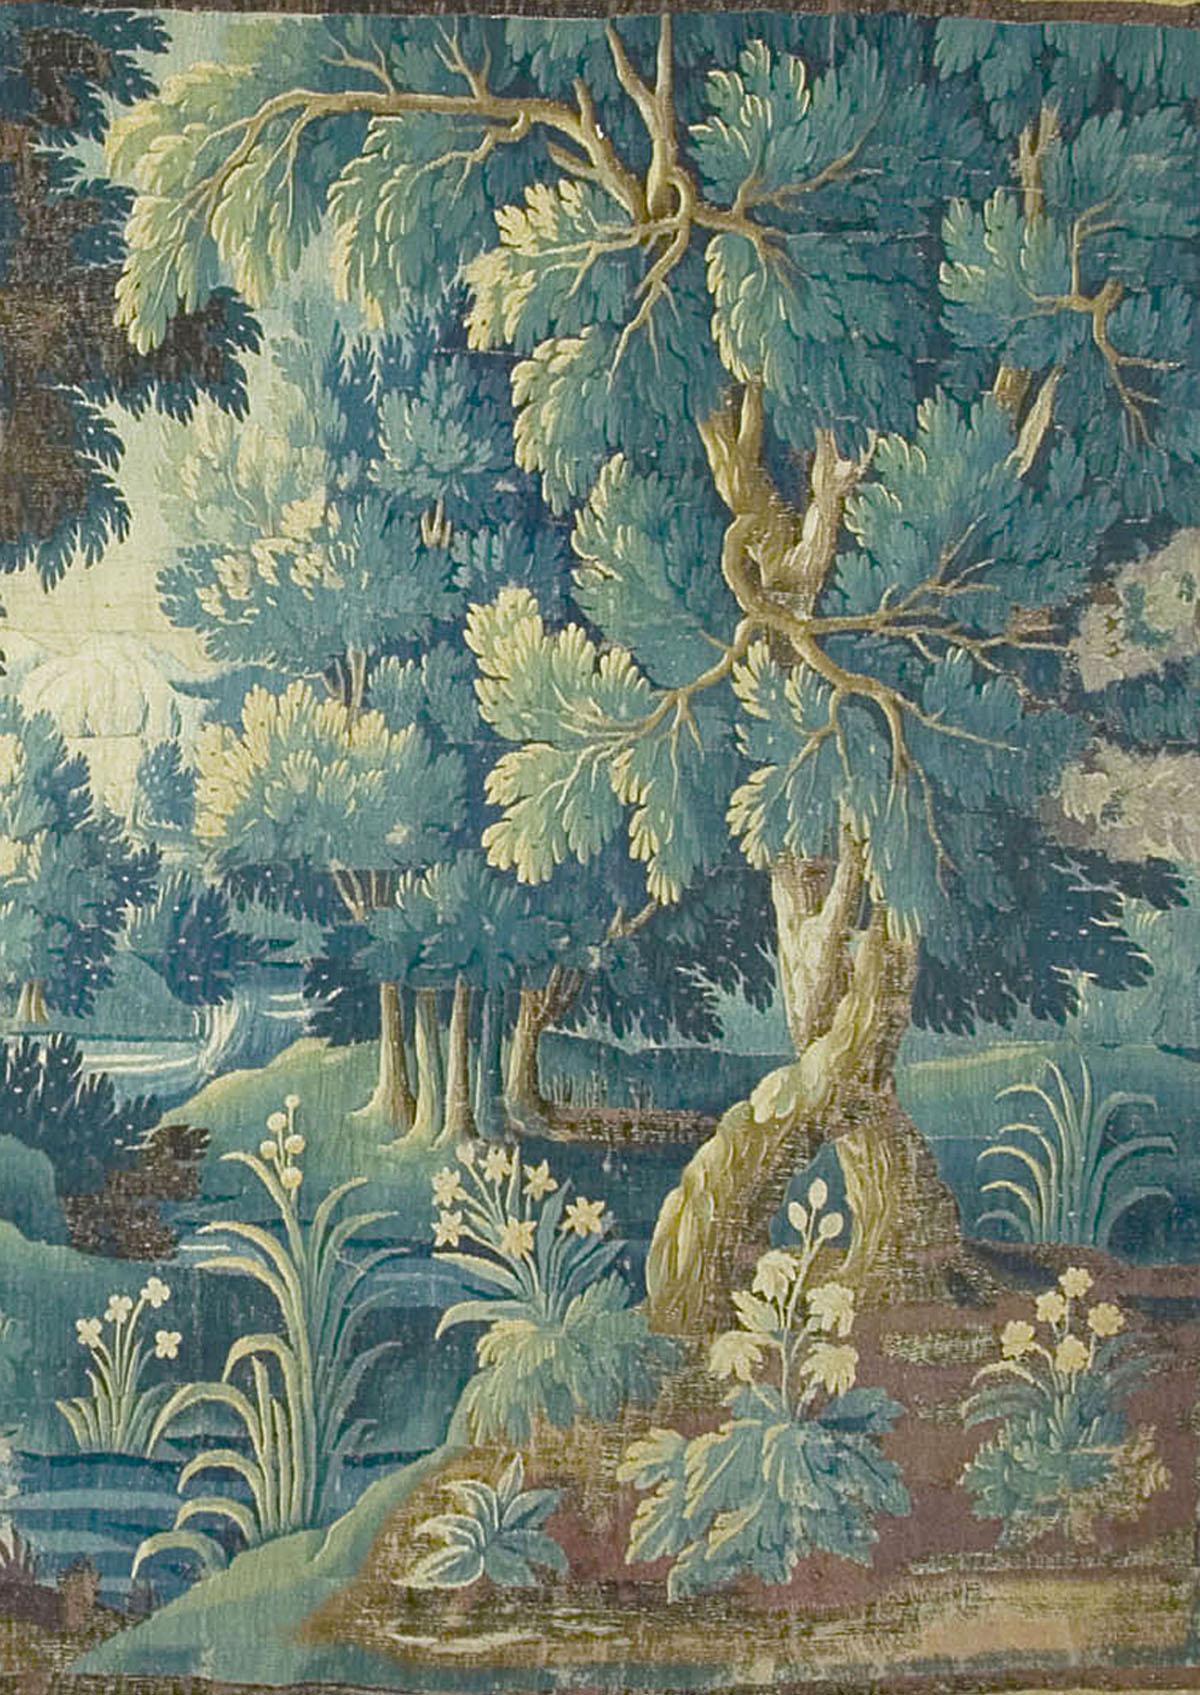 Flemish 17th century Verdure tapestry. 9'2 x 15'3 wide. A beautiful summer scene of a brook in the countryside running past lush flowers and thriving wildlife. In the center an architectural stonework fountain with two regal birds perched on its